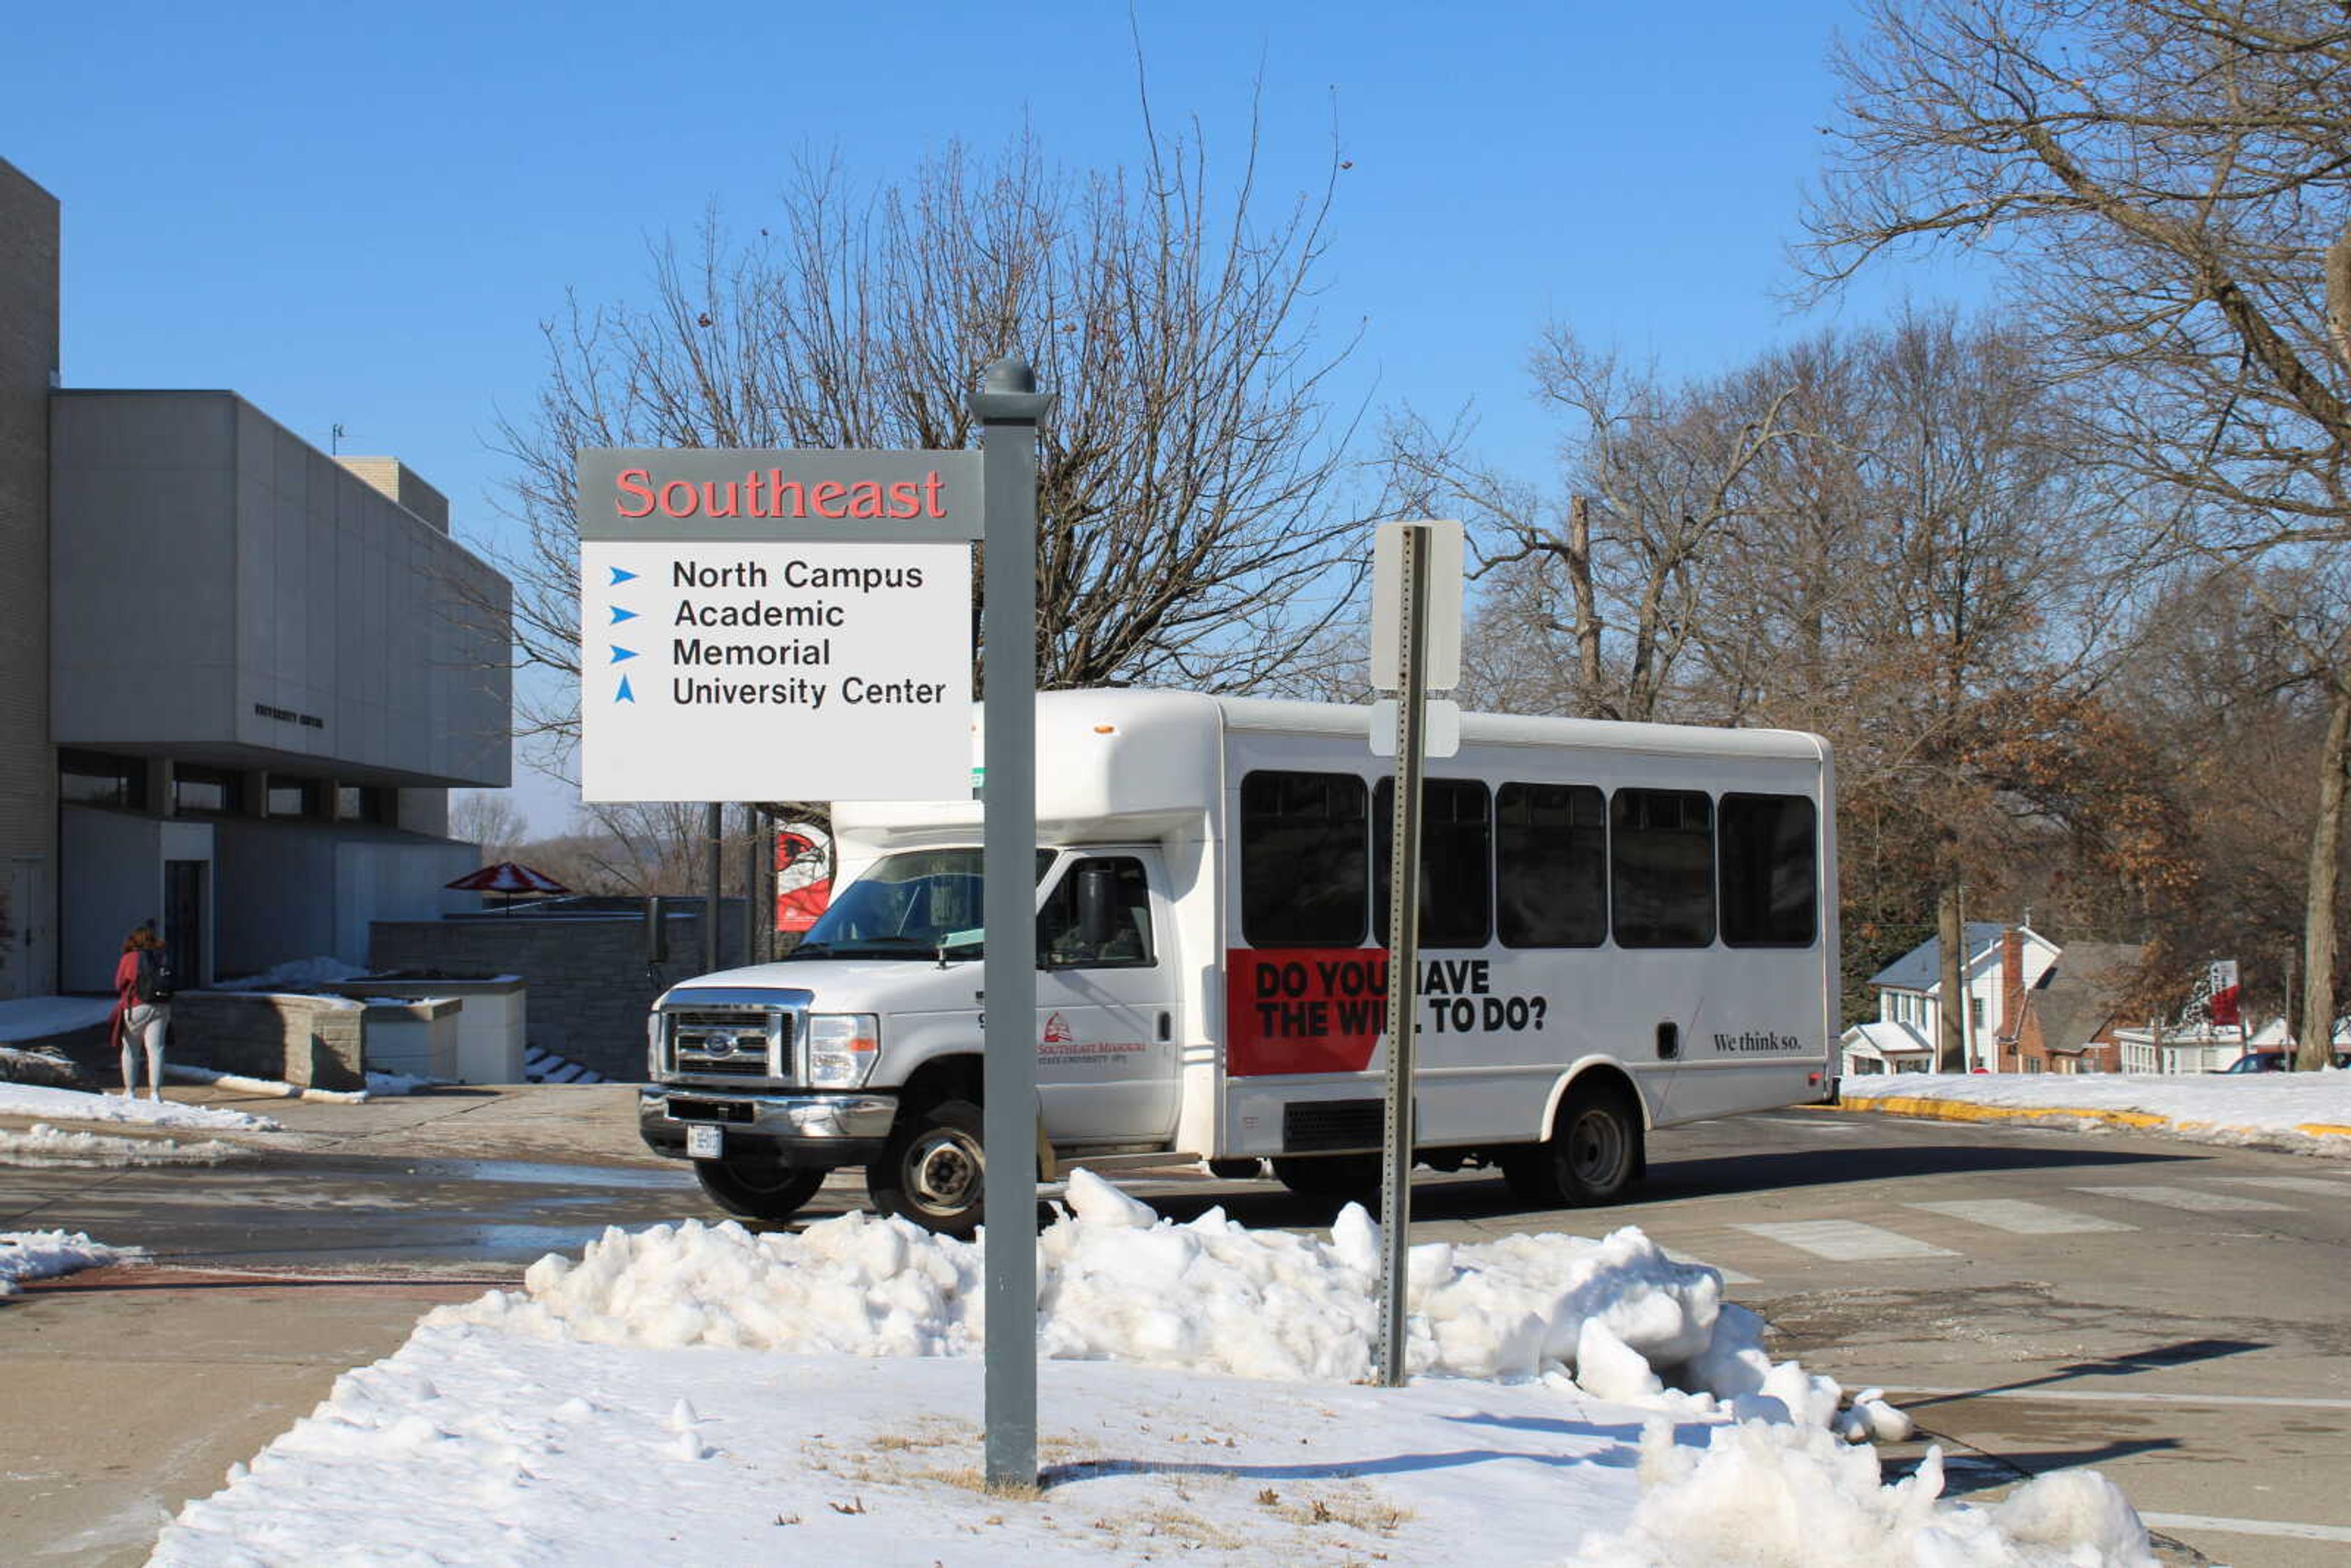 The green route shuttle bus, outside the University Center, circuits through campus every 20 minutes. It uses a tablet with an in-house application to send information to Shuttle Track, which has been down as of Jan. 26.